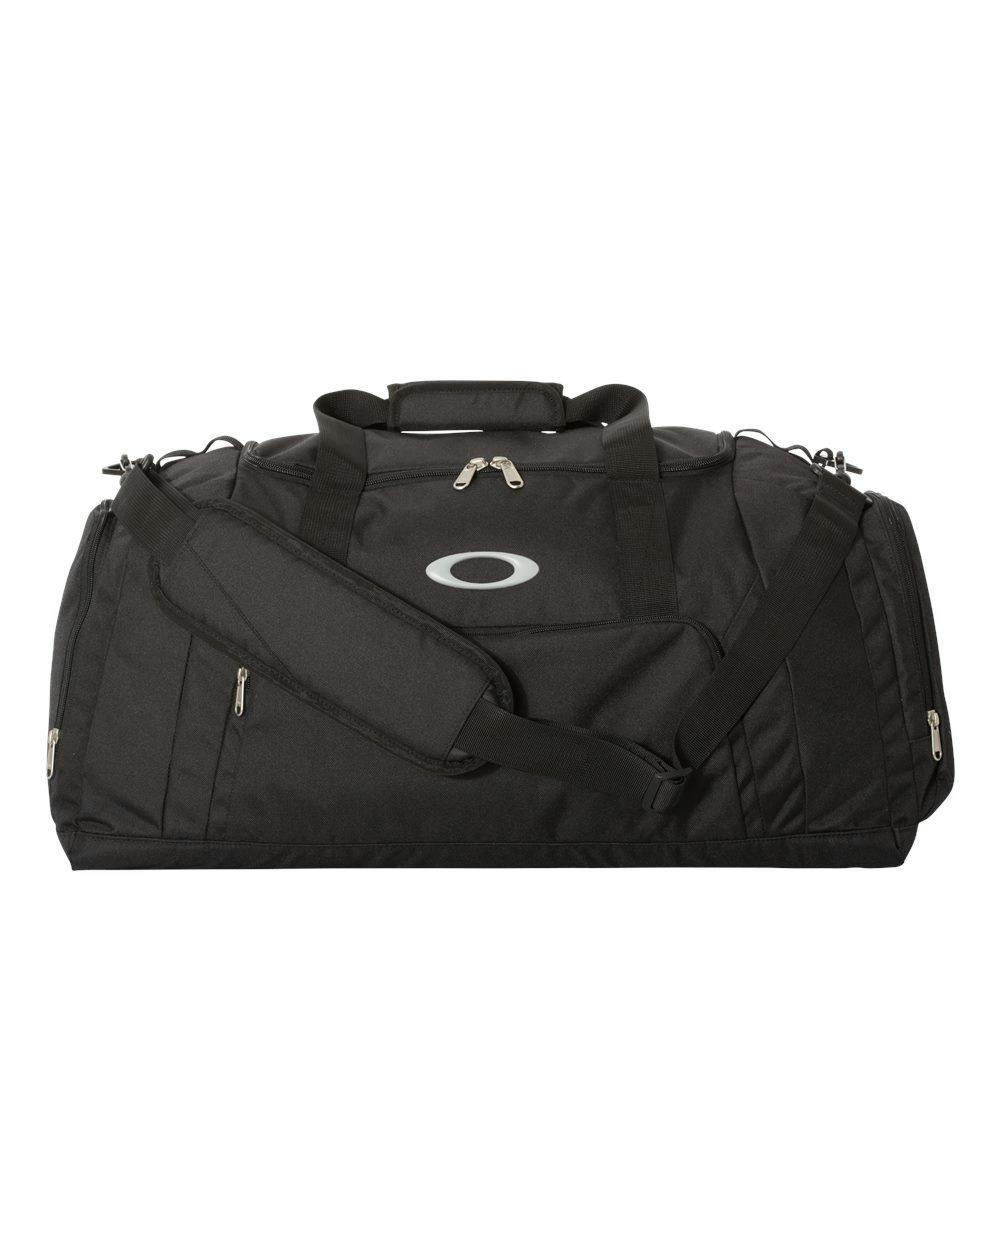 Image for 55L Gym to Street Duffel Bag - FOS901099